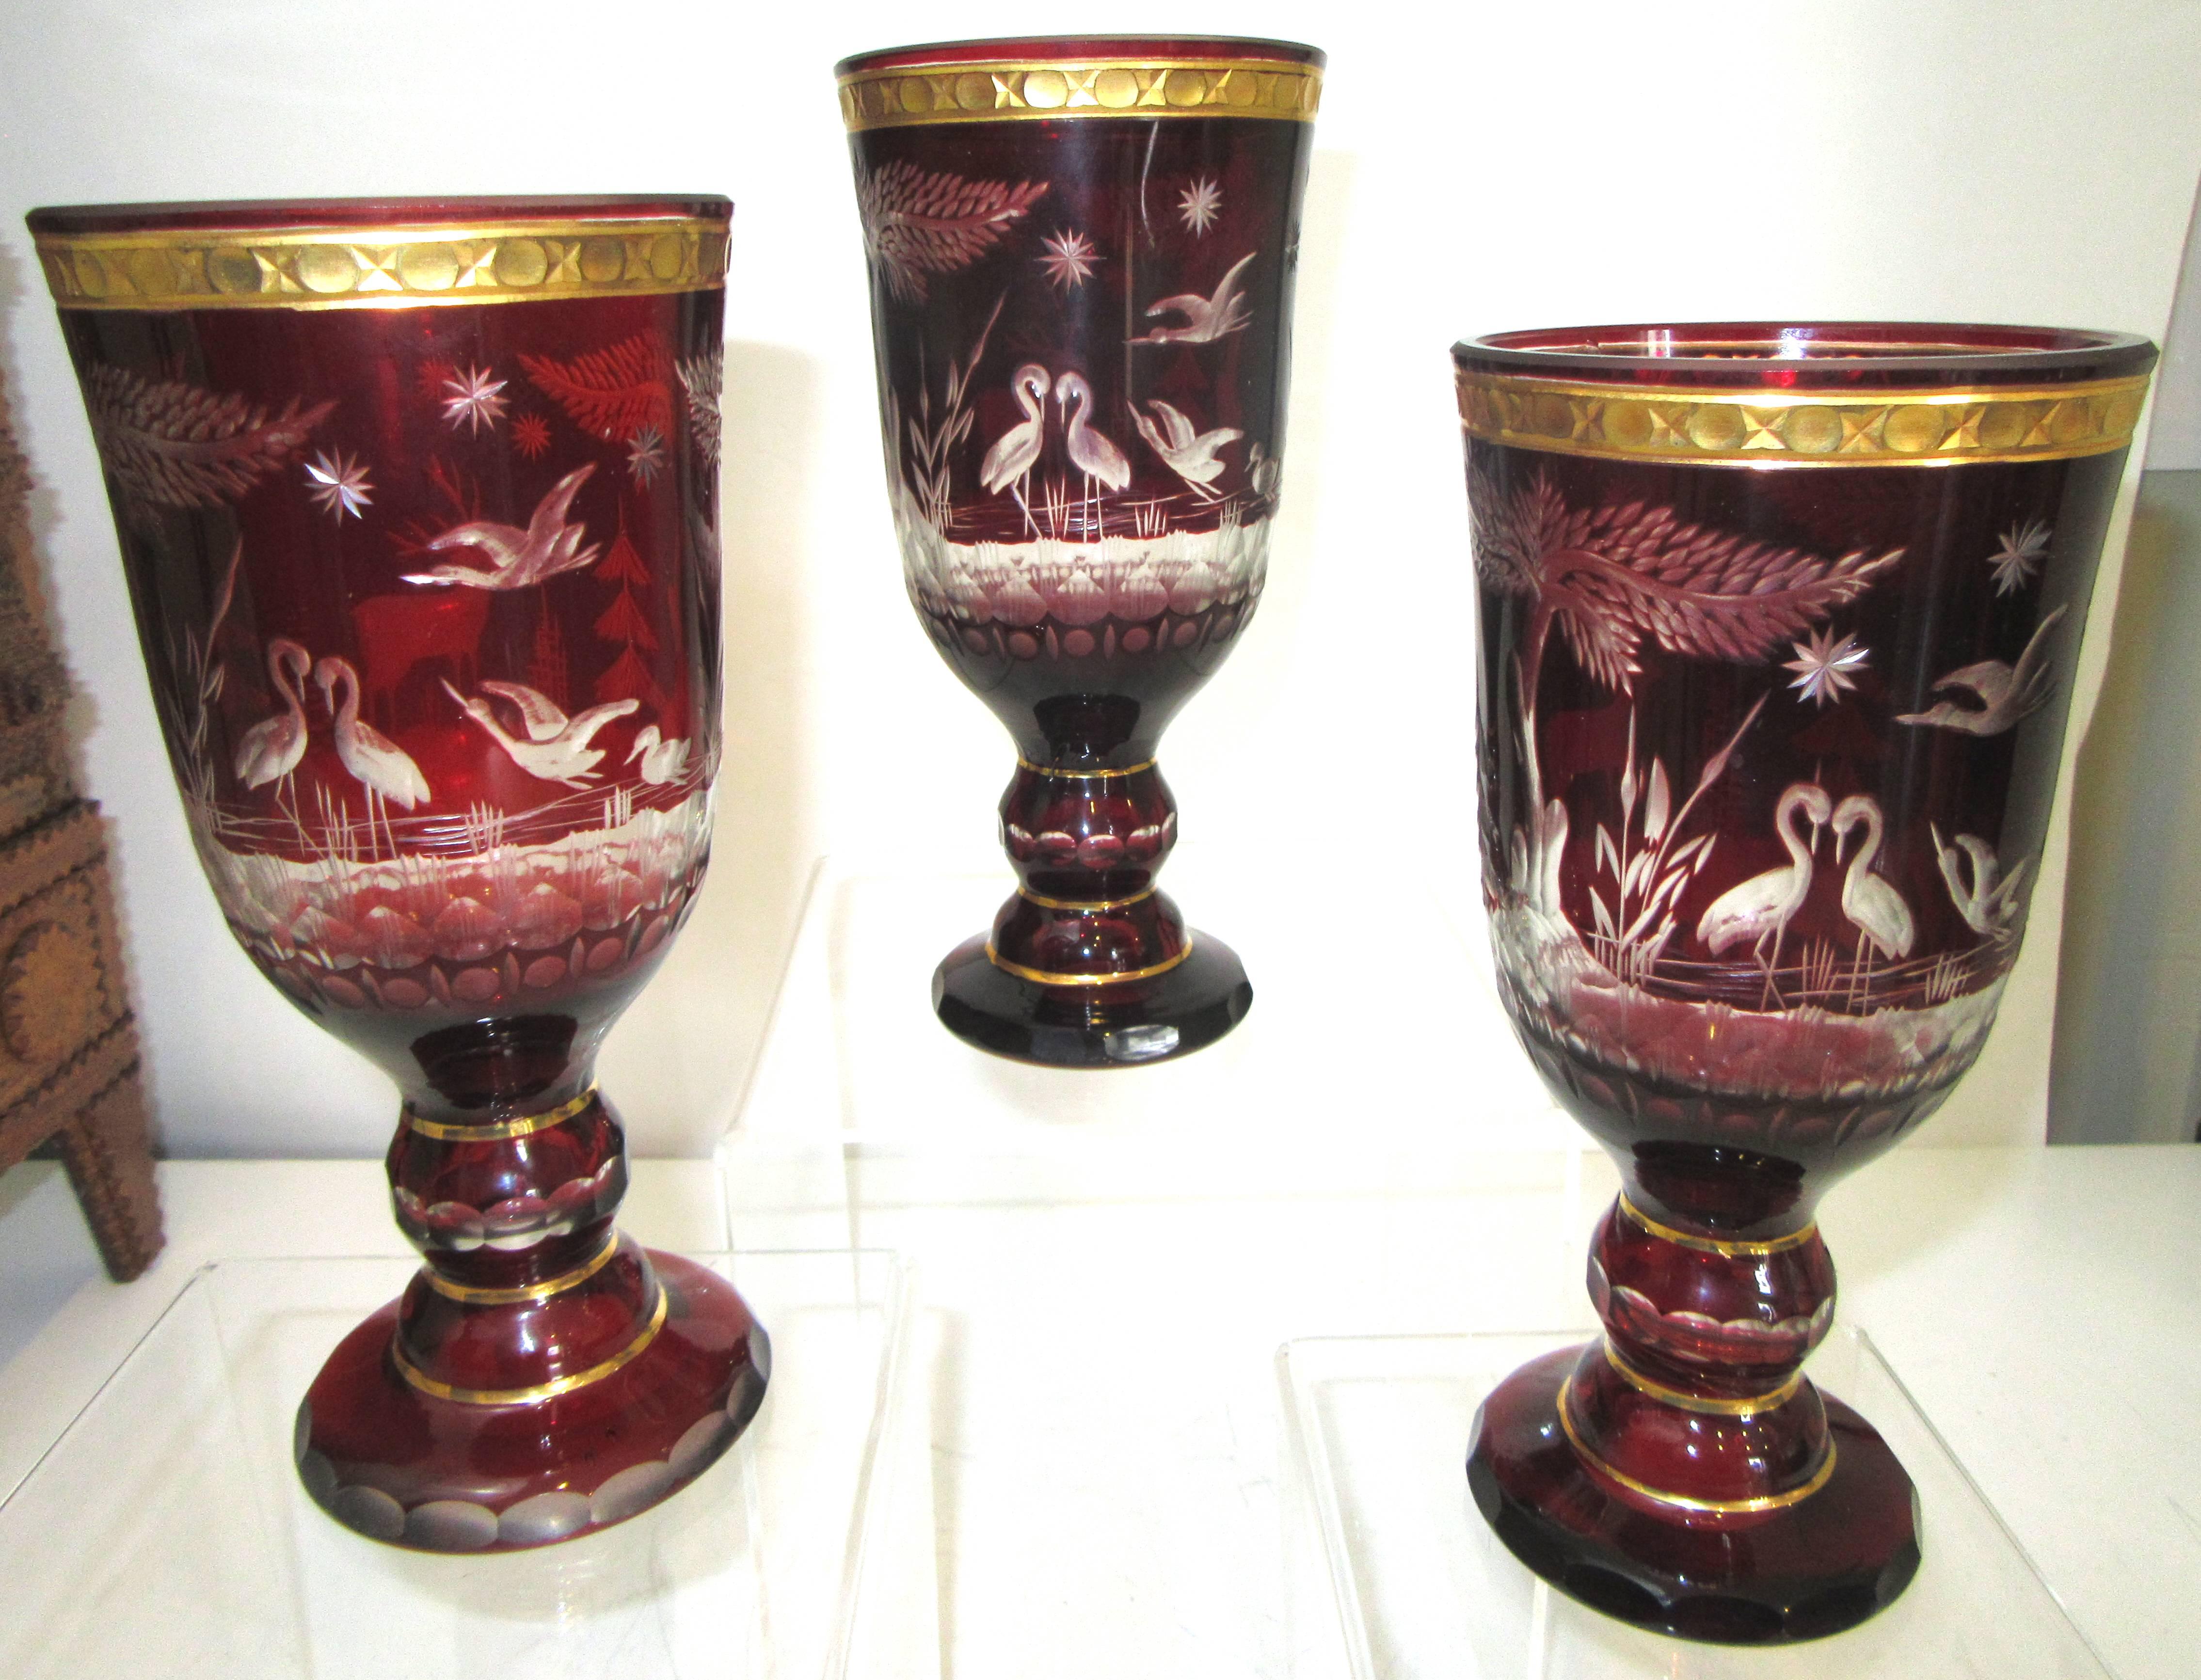 Three tall and substantial ruby red goblets that are cut to clear depictions of nature and wildlife. Each has a gilded rim.